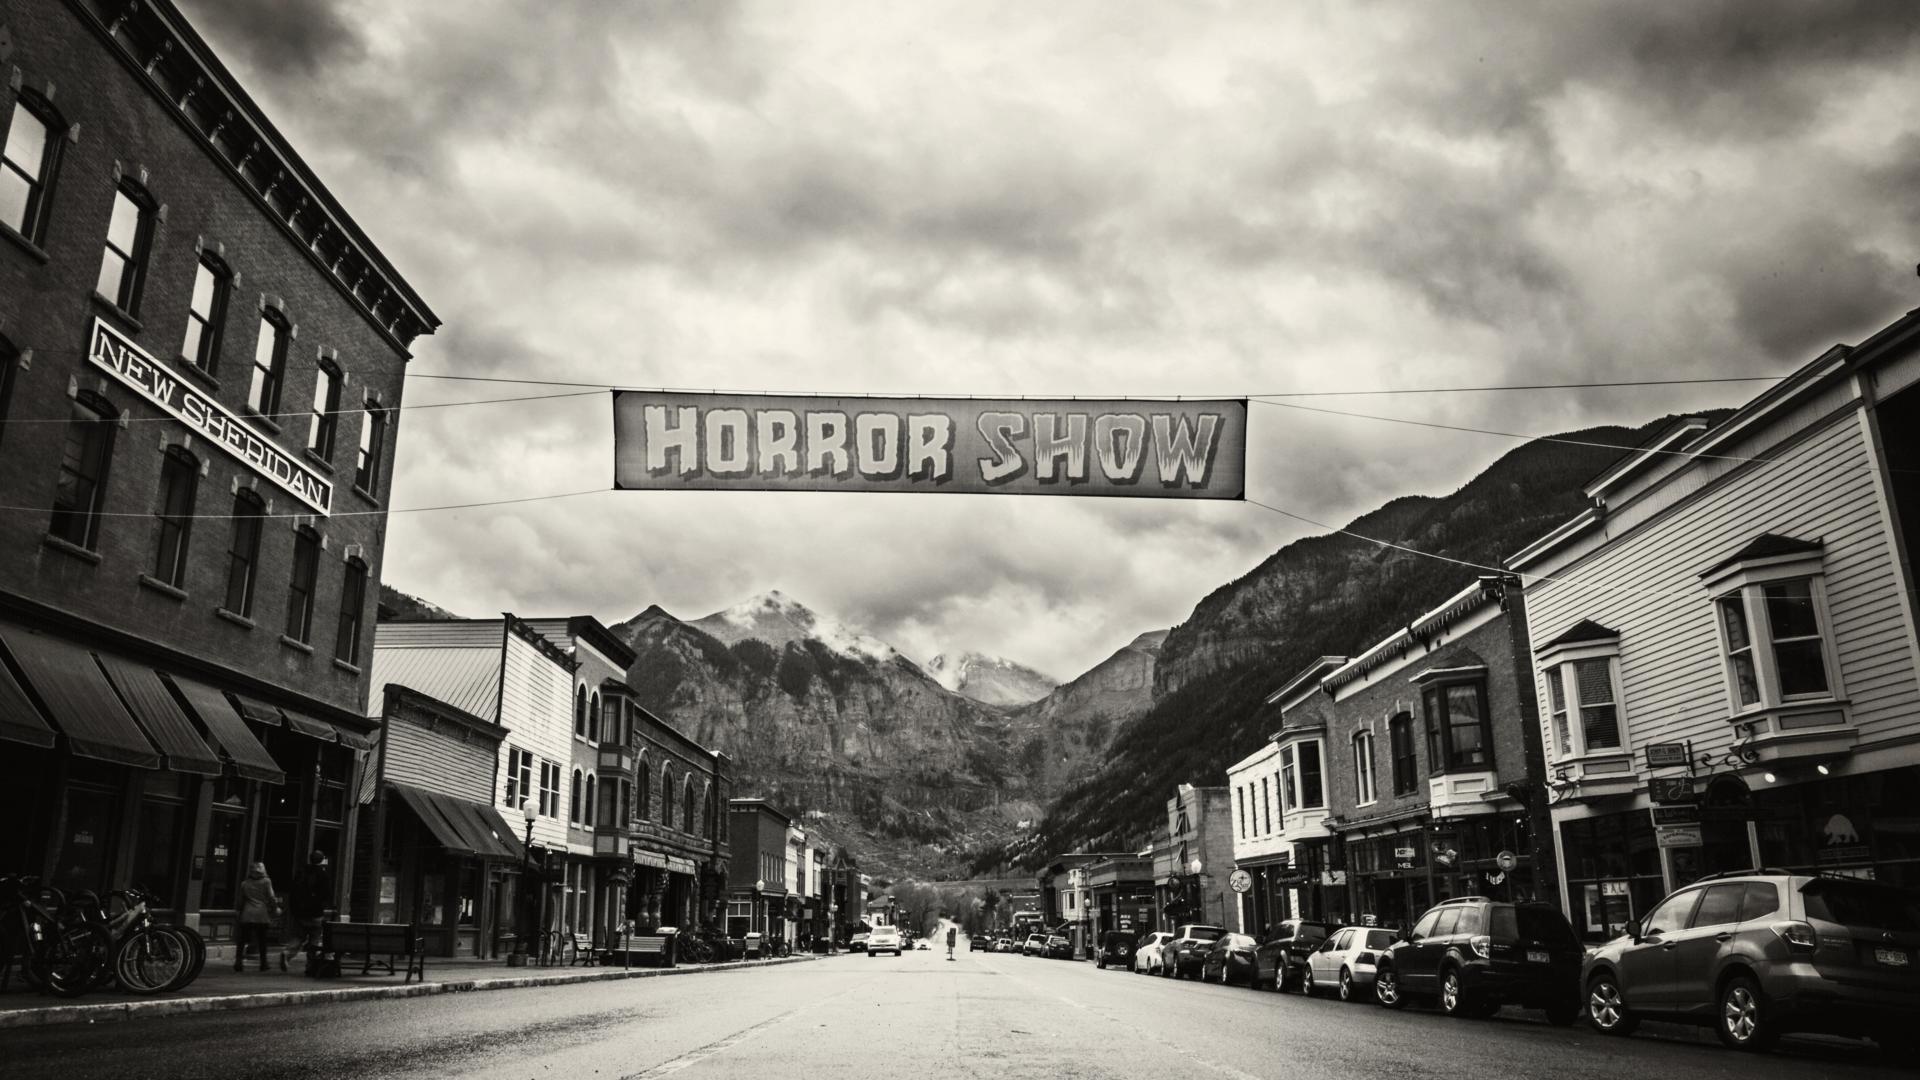 Telluride Horror Show: "Twisted Beauty"